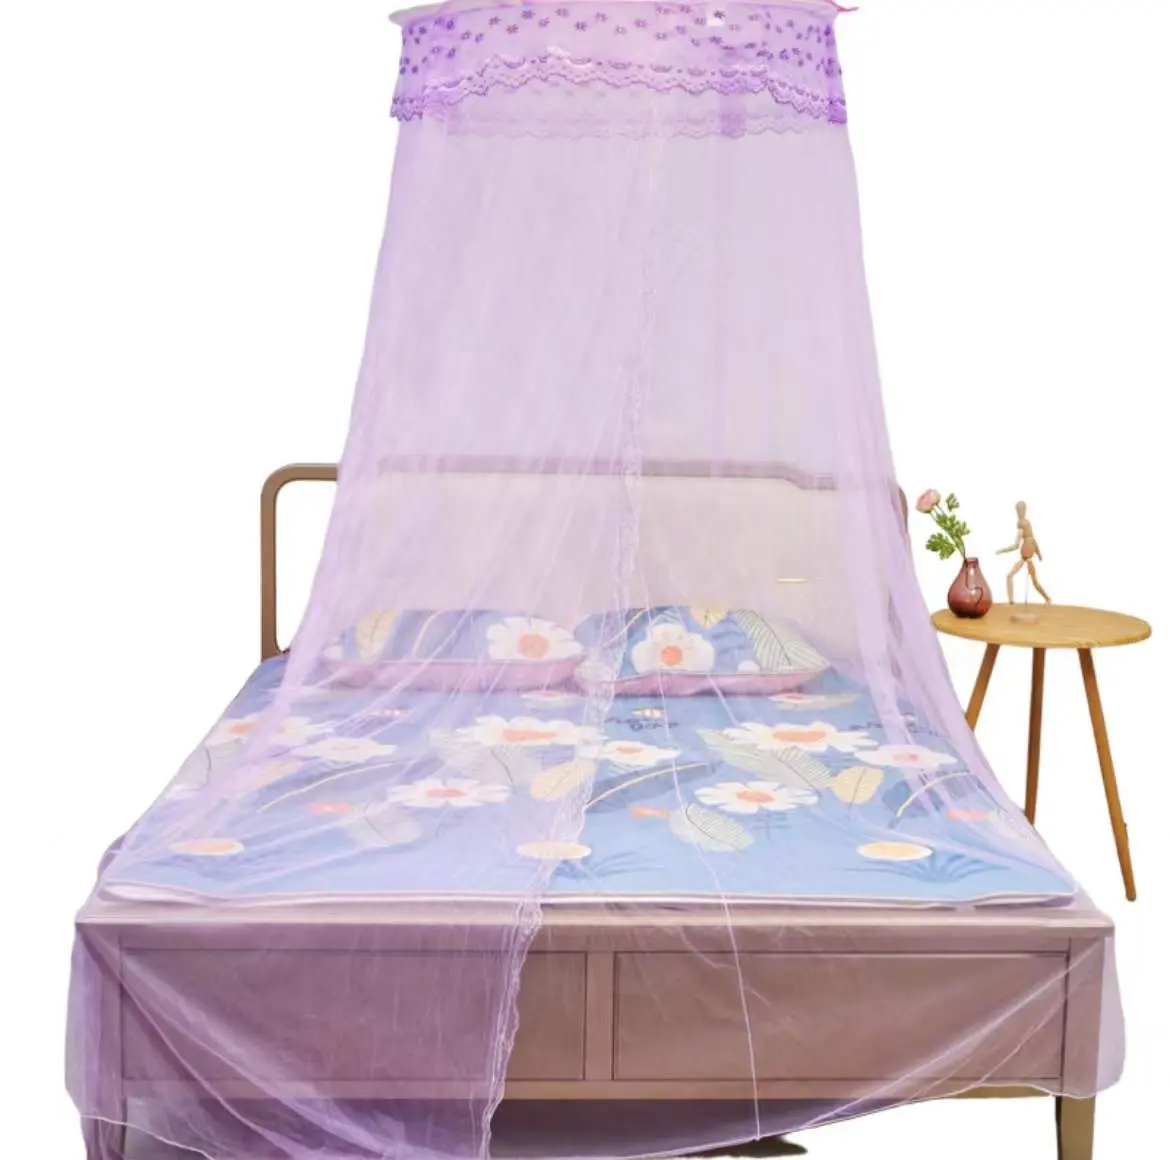 New design noble and elegant ceiling mosquito net  fresh and encrypted princess style floor lace mosquito net